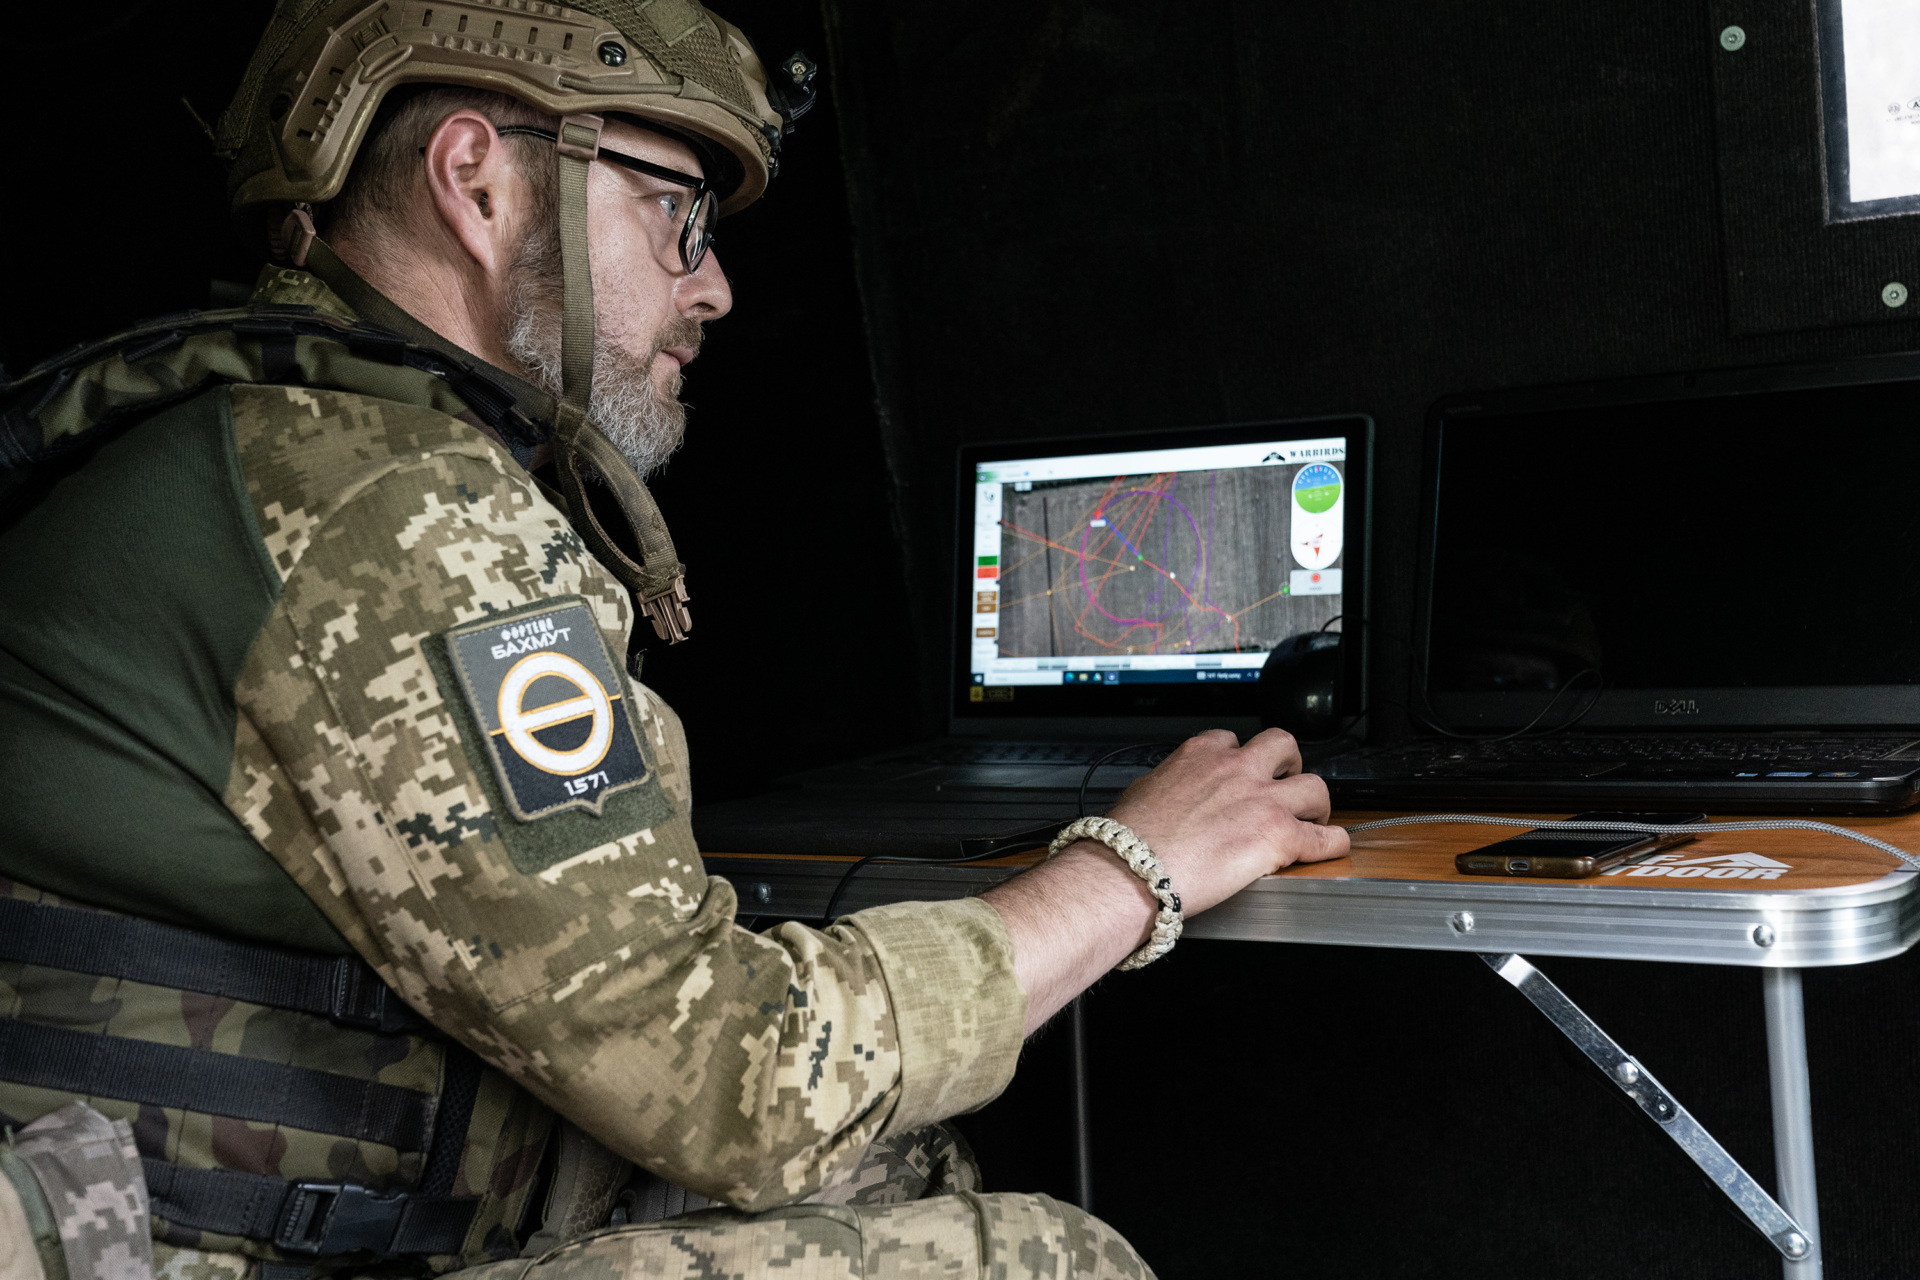 DONETSK REGION, UKRAINE - 2023/05/31: Member of Ukrainian Army Forces operates Aviation Systems of Ukraine Valkyrja drone designed and produced in Ukraine used for reconnaissance of Russian positions in undisclosed location near town of New York Donetsk region. (Photo by Lev Radin/Pacific Press/LightRocket via Getty Images)